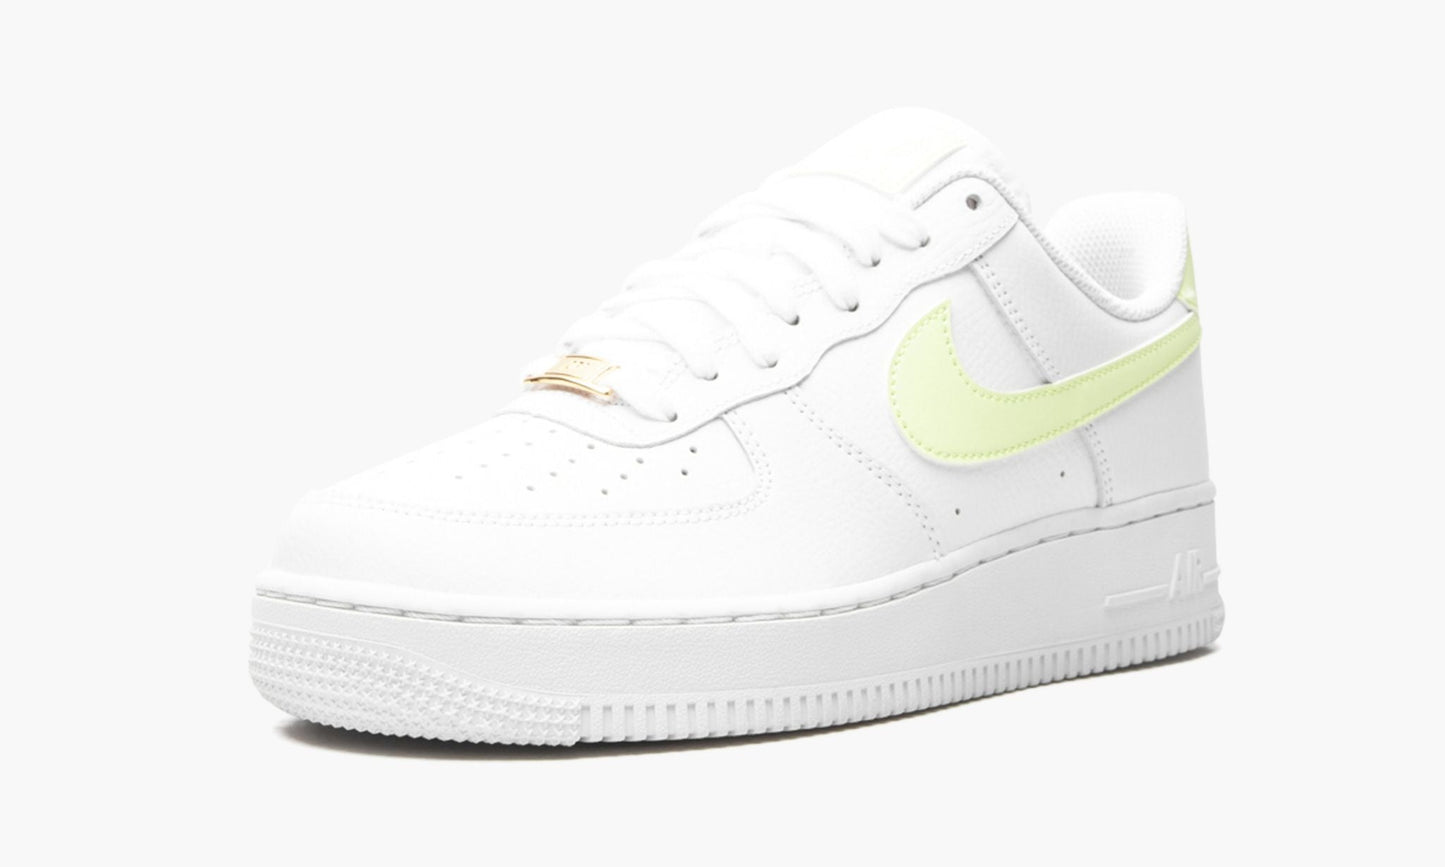 WMNS Air Force 1 Low "White / Barely Volt"